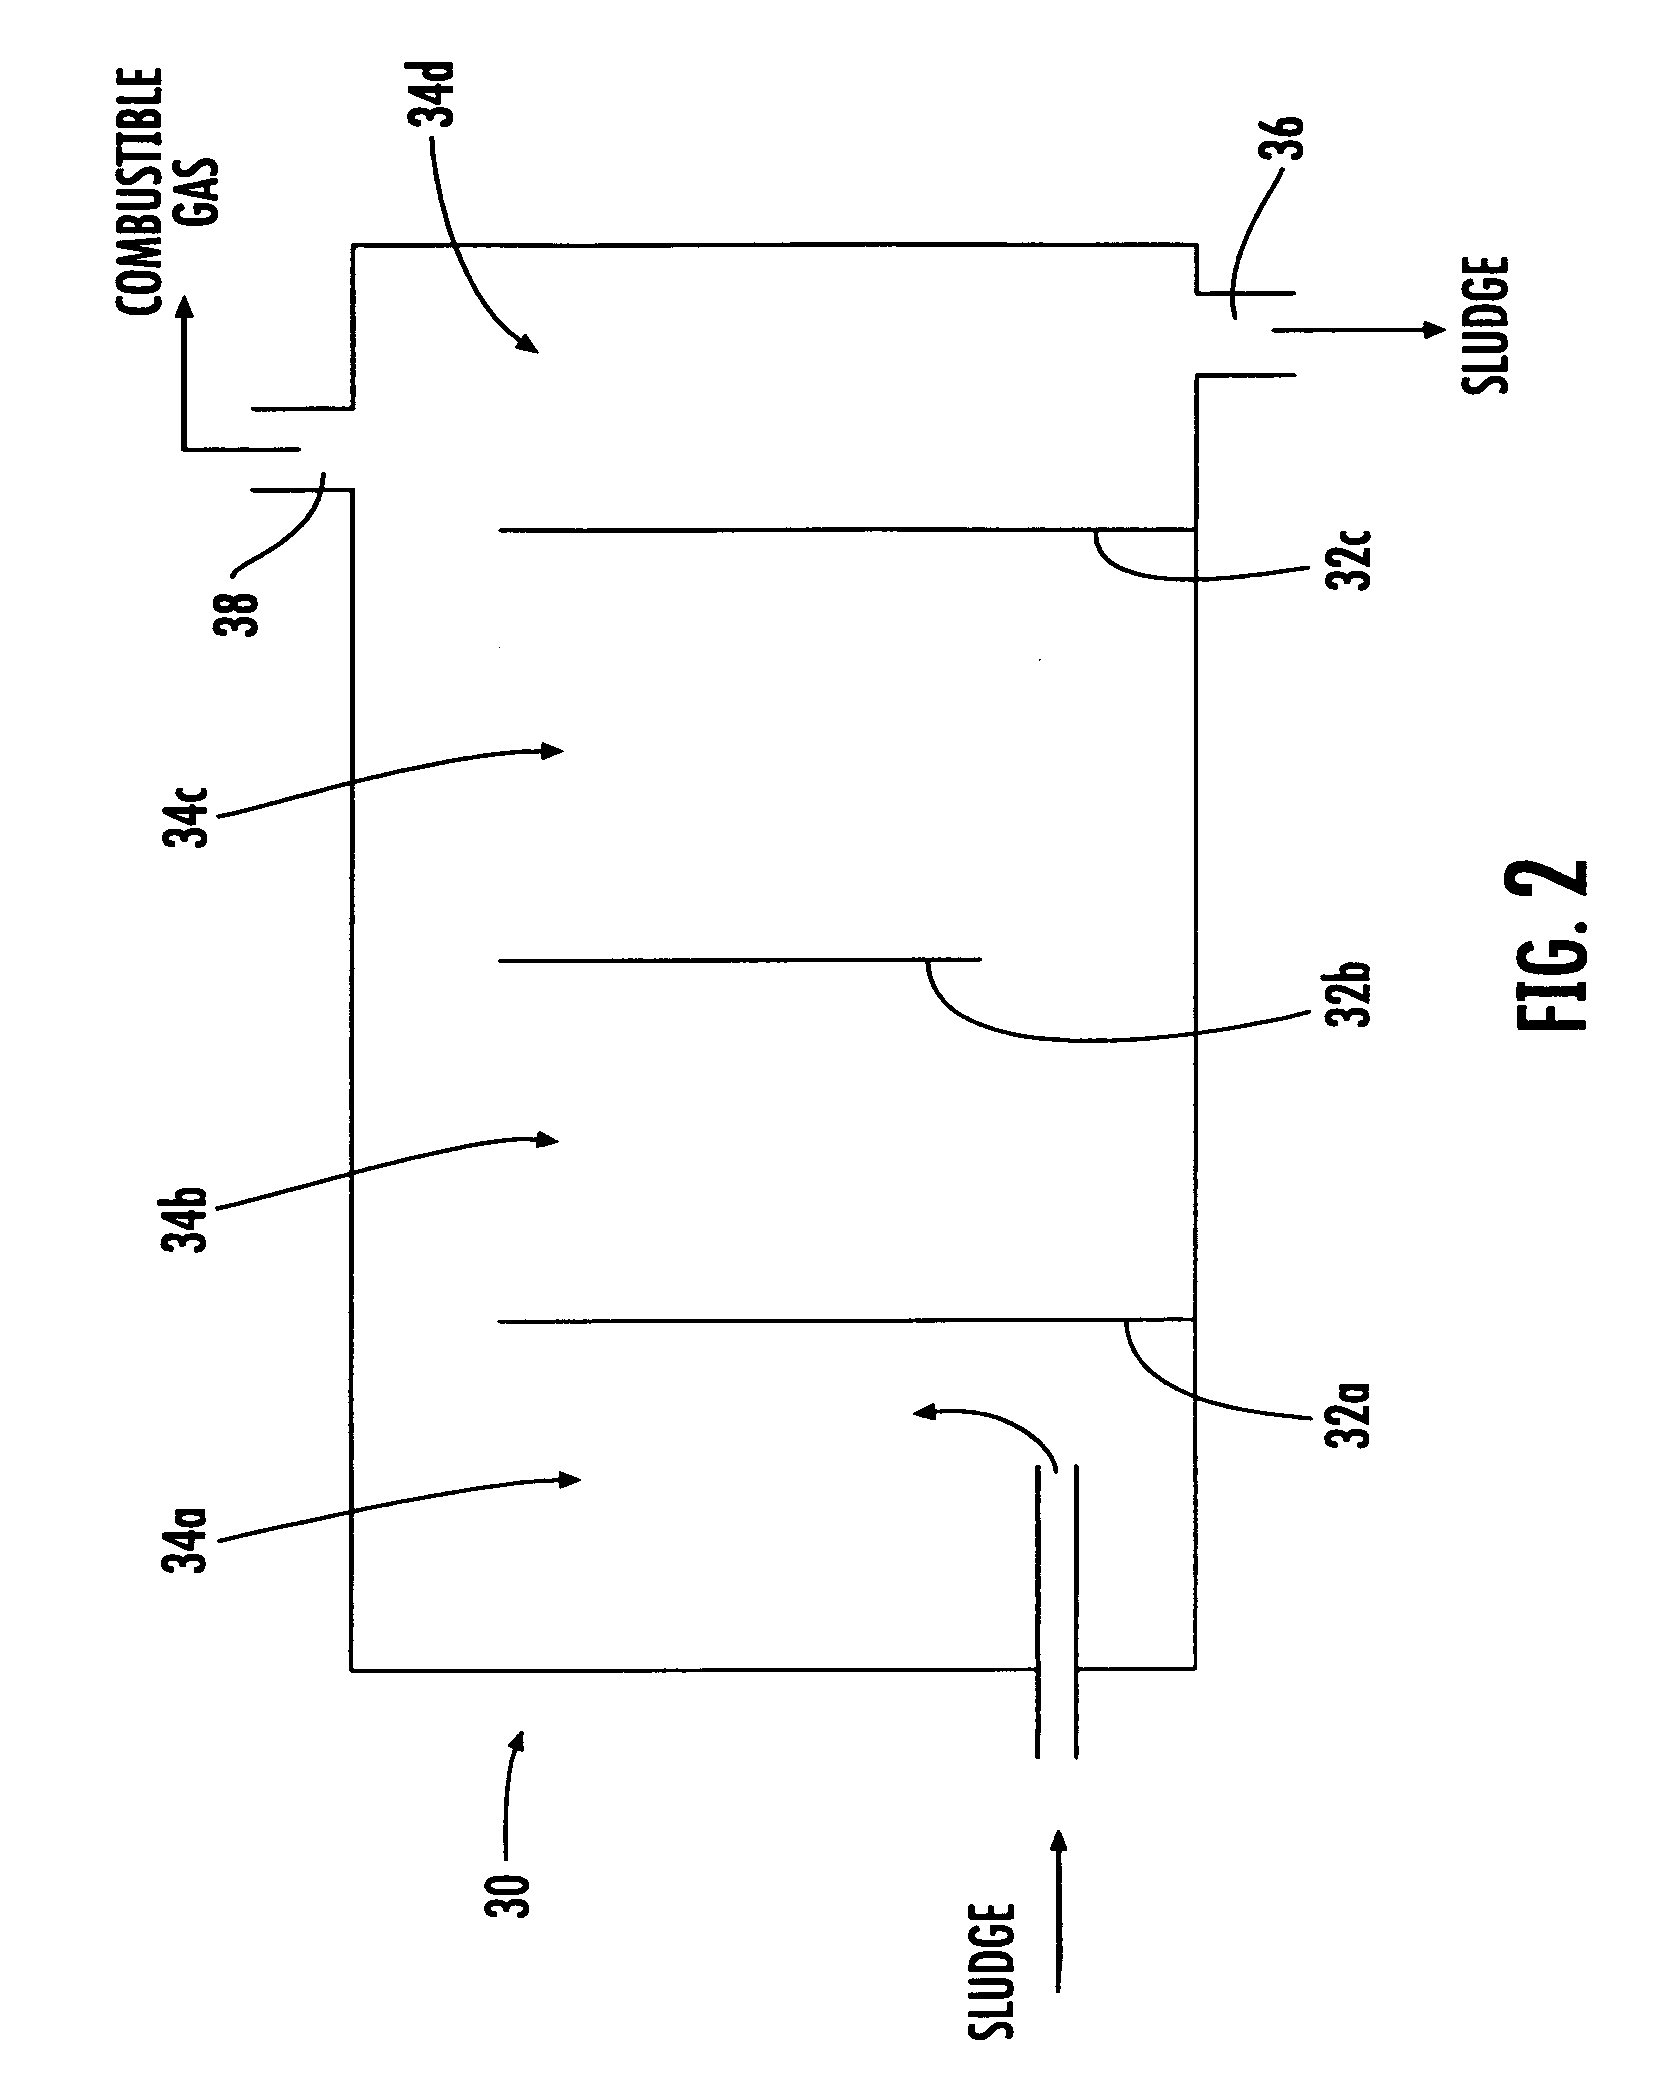 System for wastewater treatment and digestion having aerobic and anaerobic treatment zones